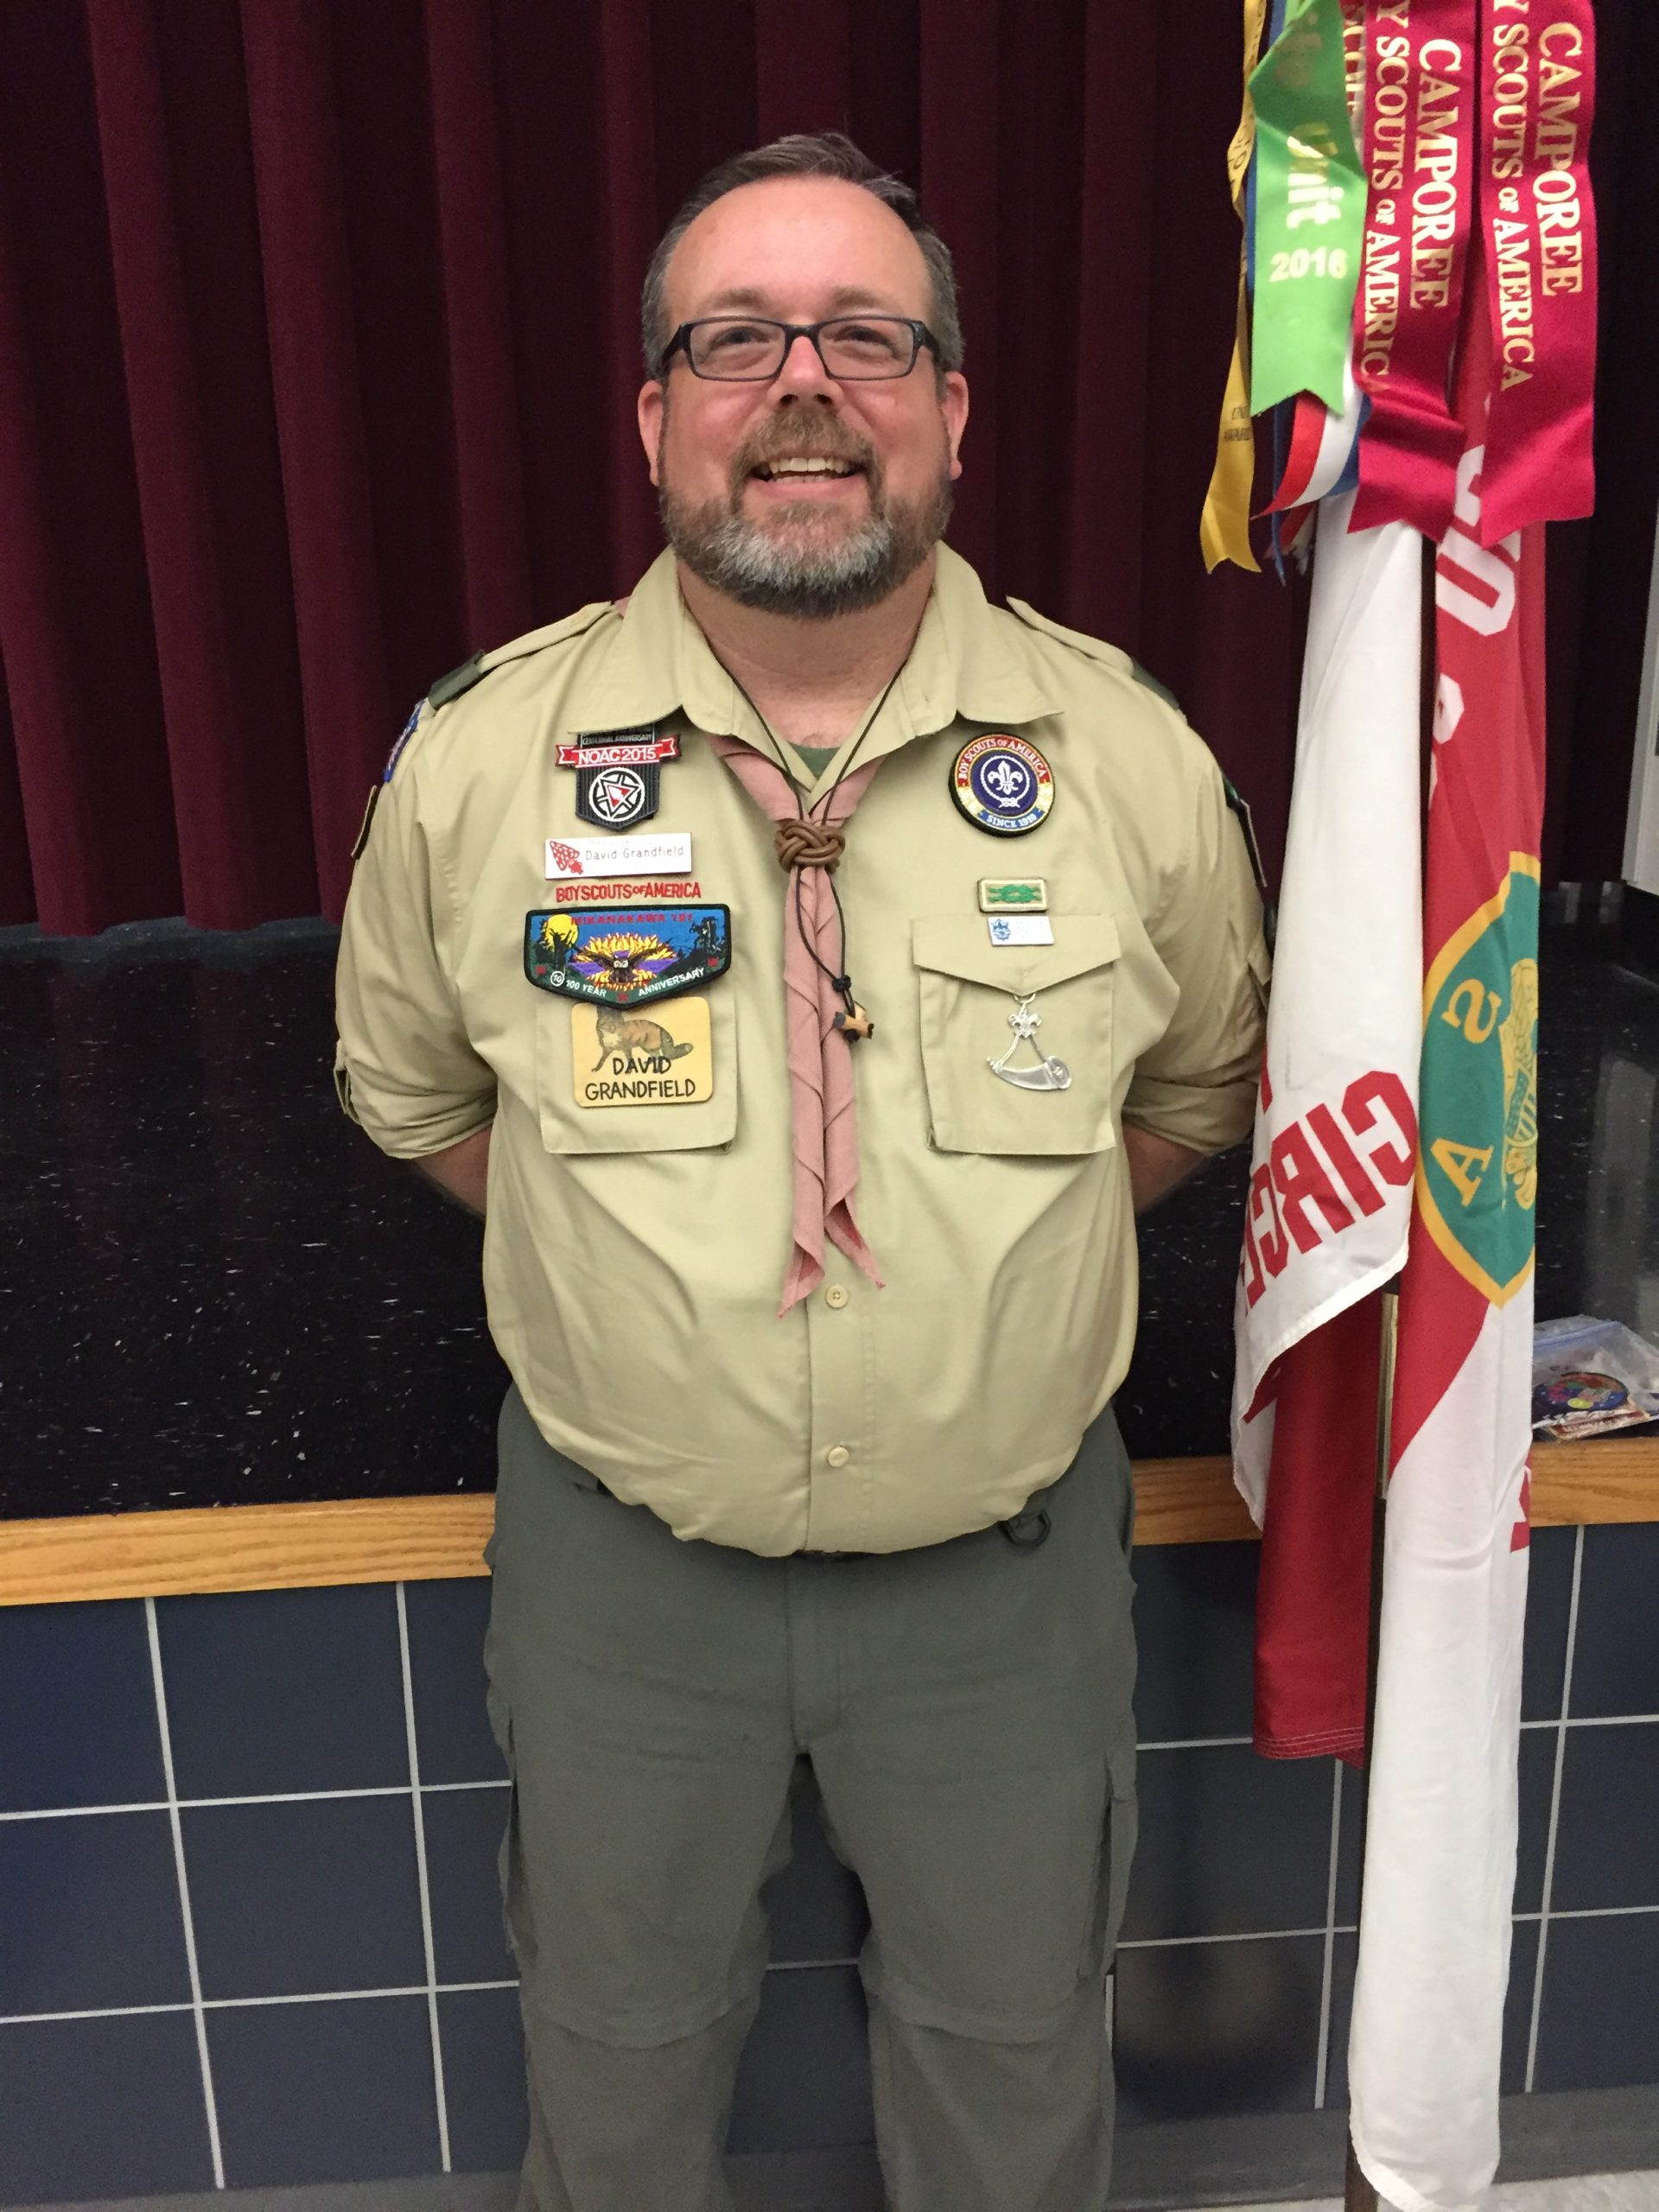 Scoutmaster David Grandfield after being awarded his  Beads, Woggle and Neckerchief